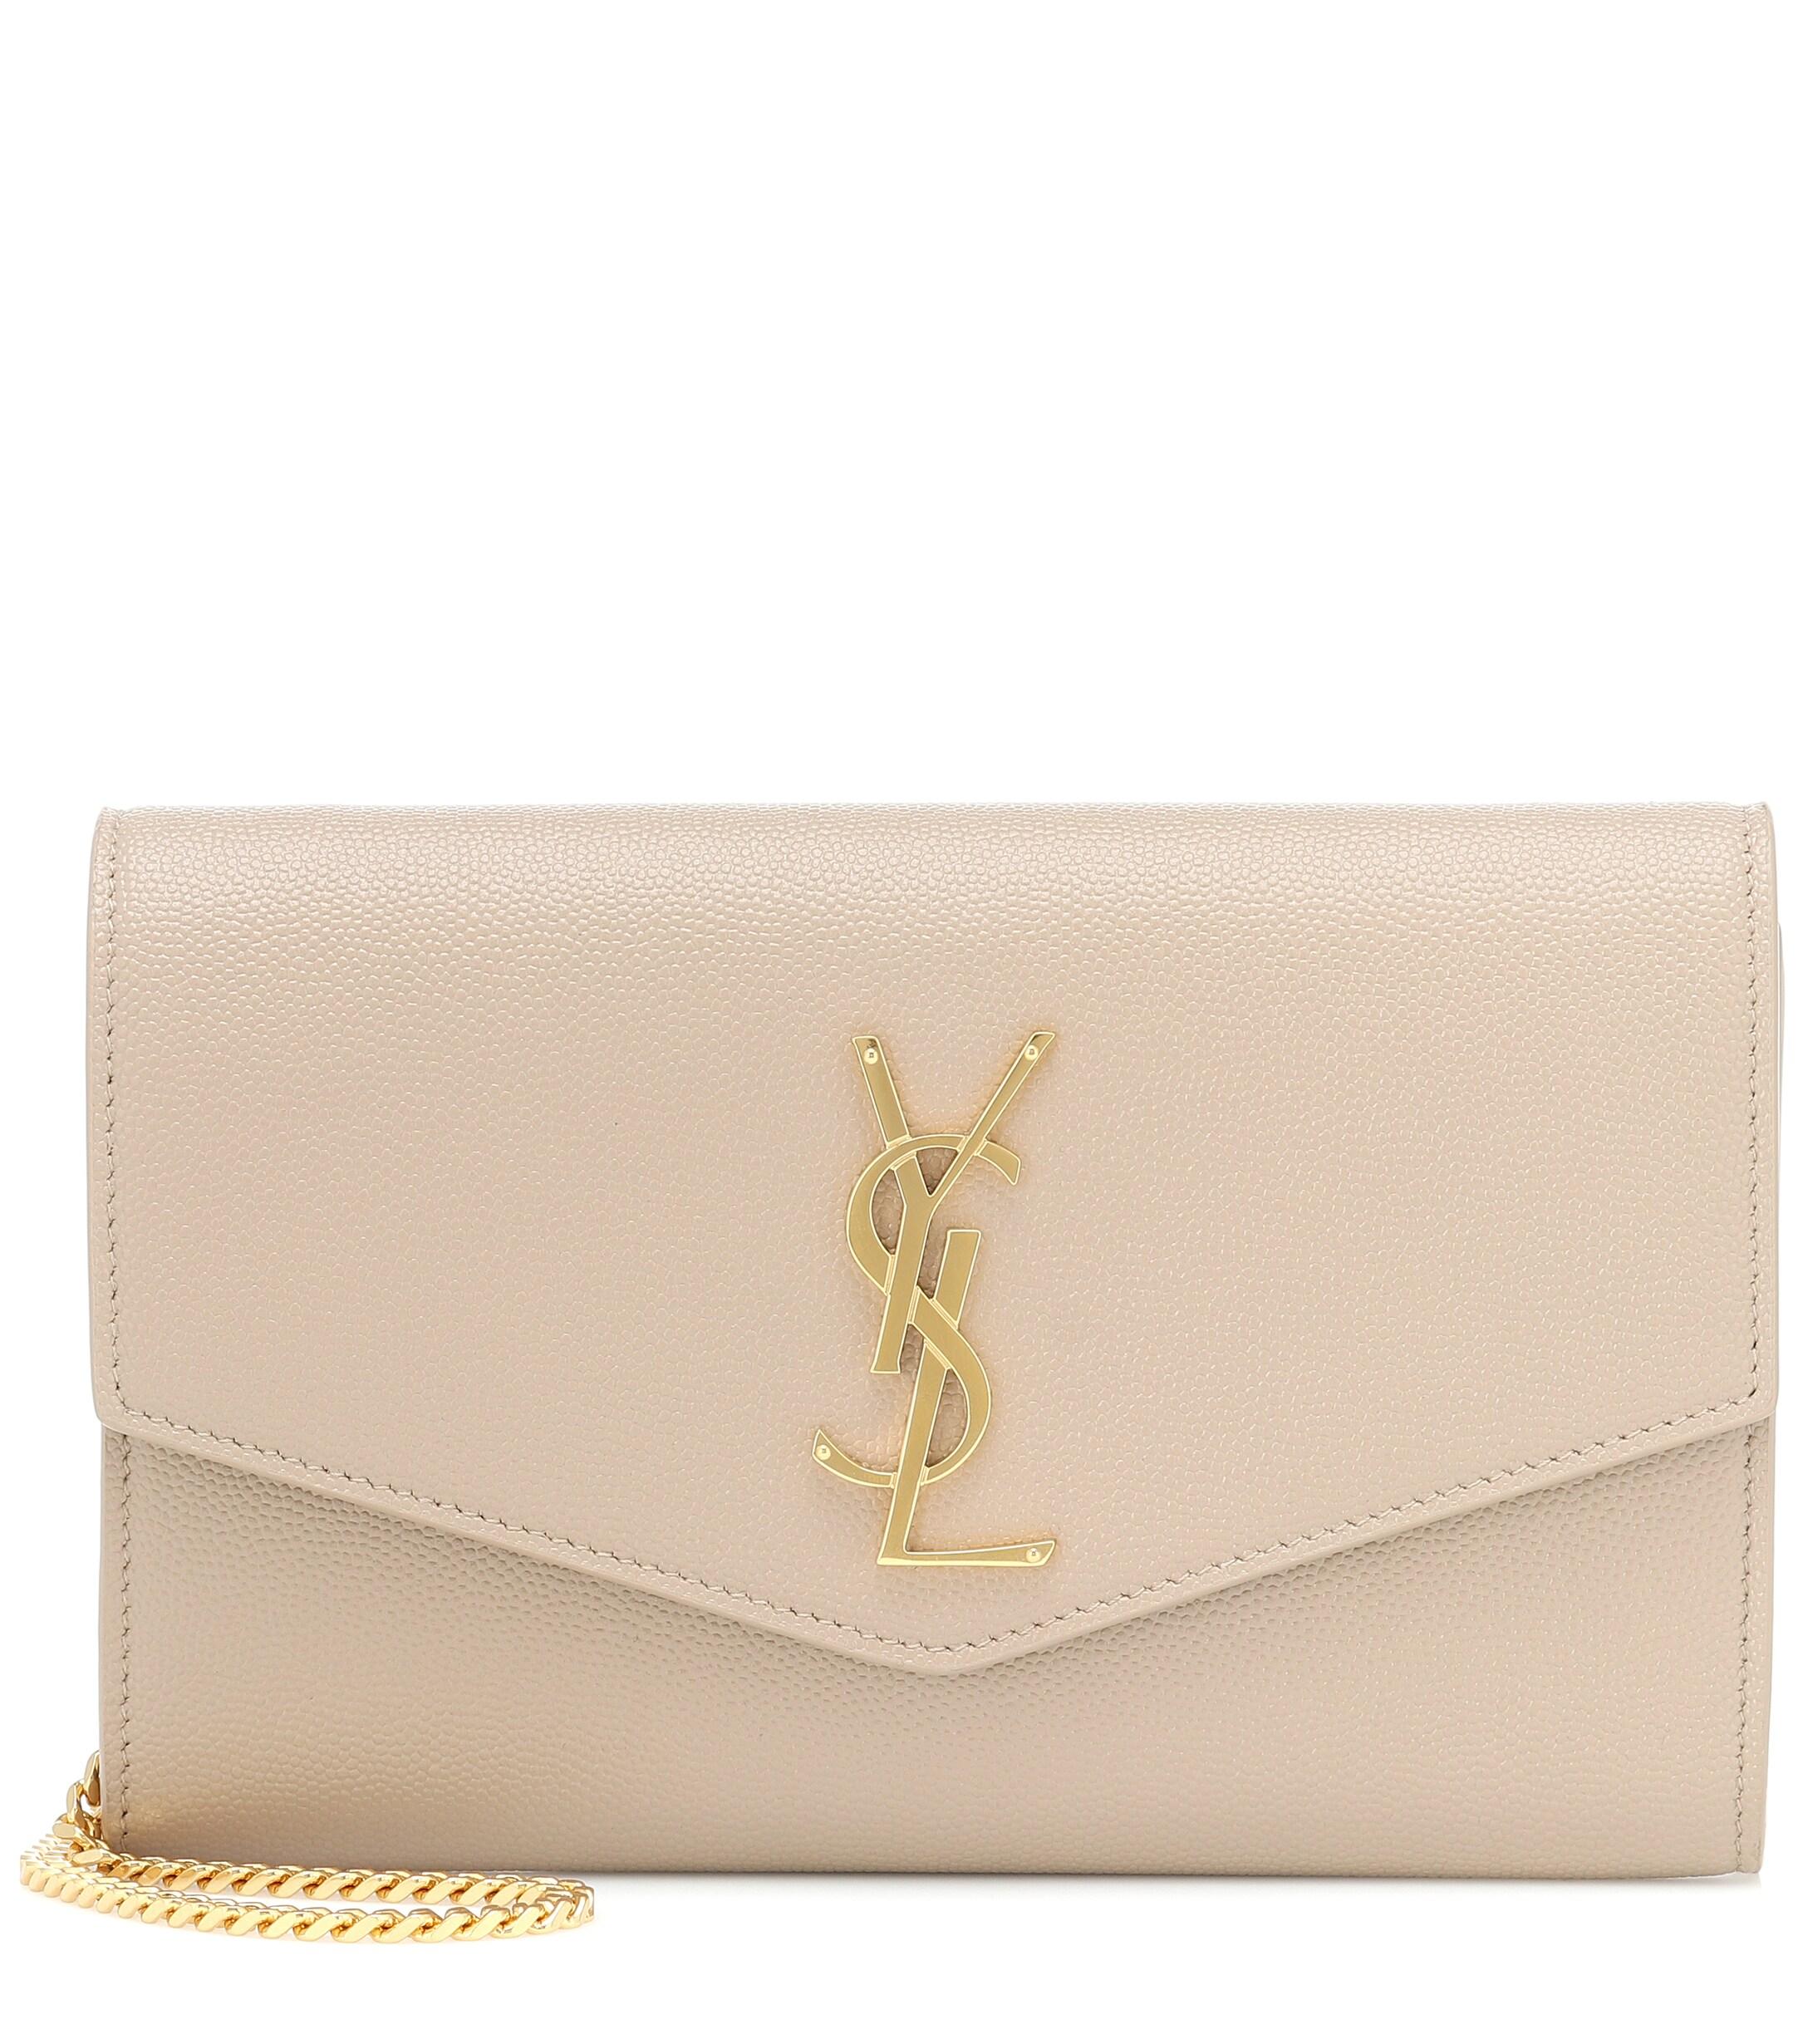 Saint Laurent Uptown Small Leather Clutch in Beige (Natural) - Lyst